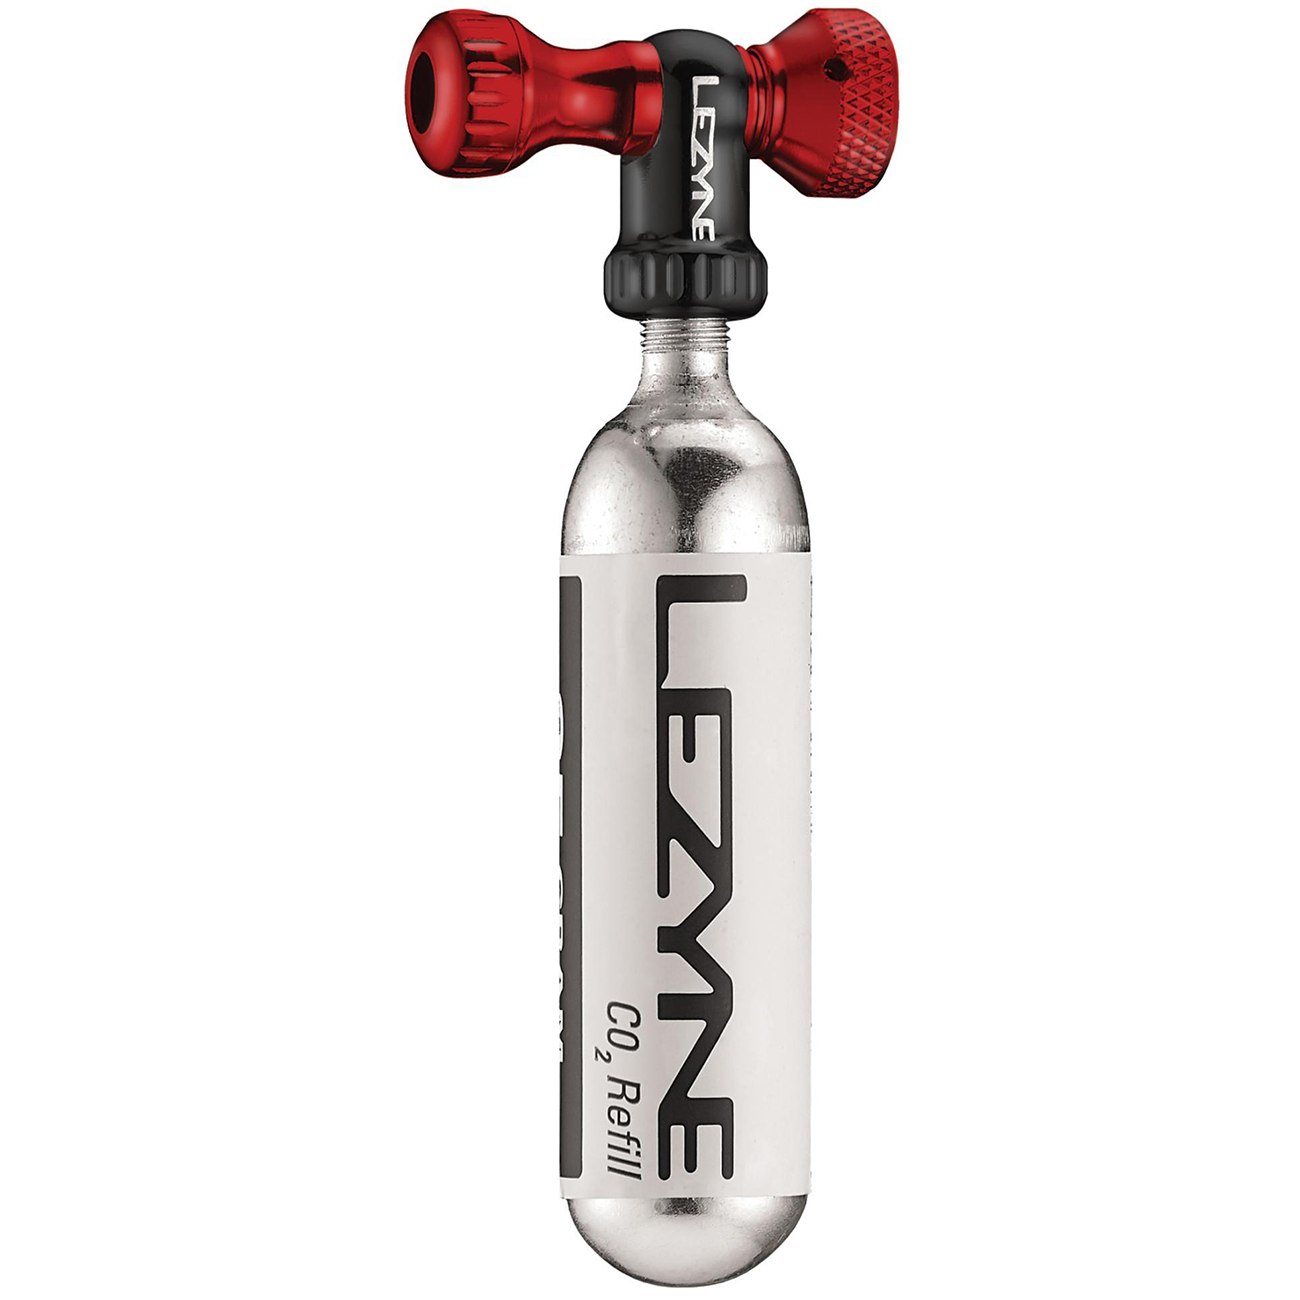 Picture of Lezyne Control Drive CO2 Cartridge Pump - 25g - red